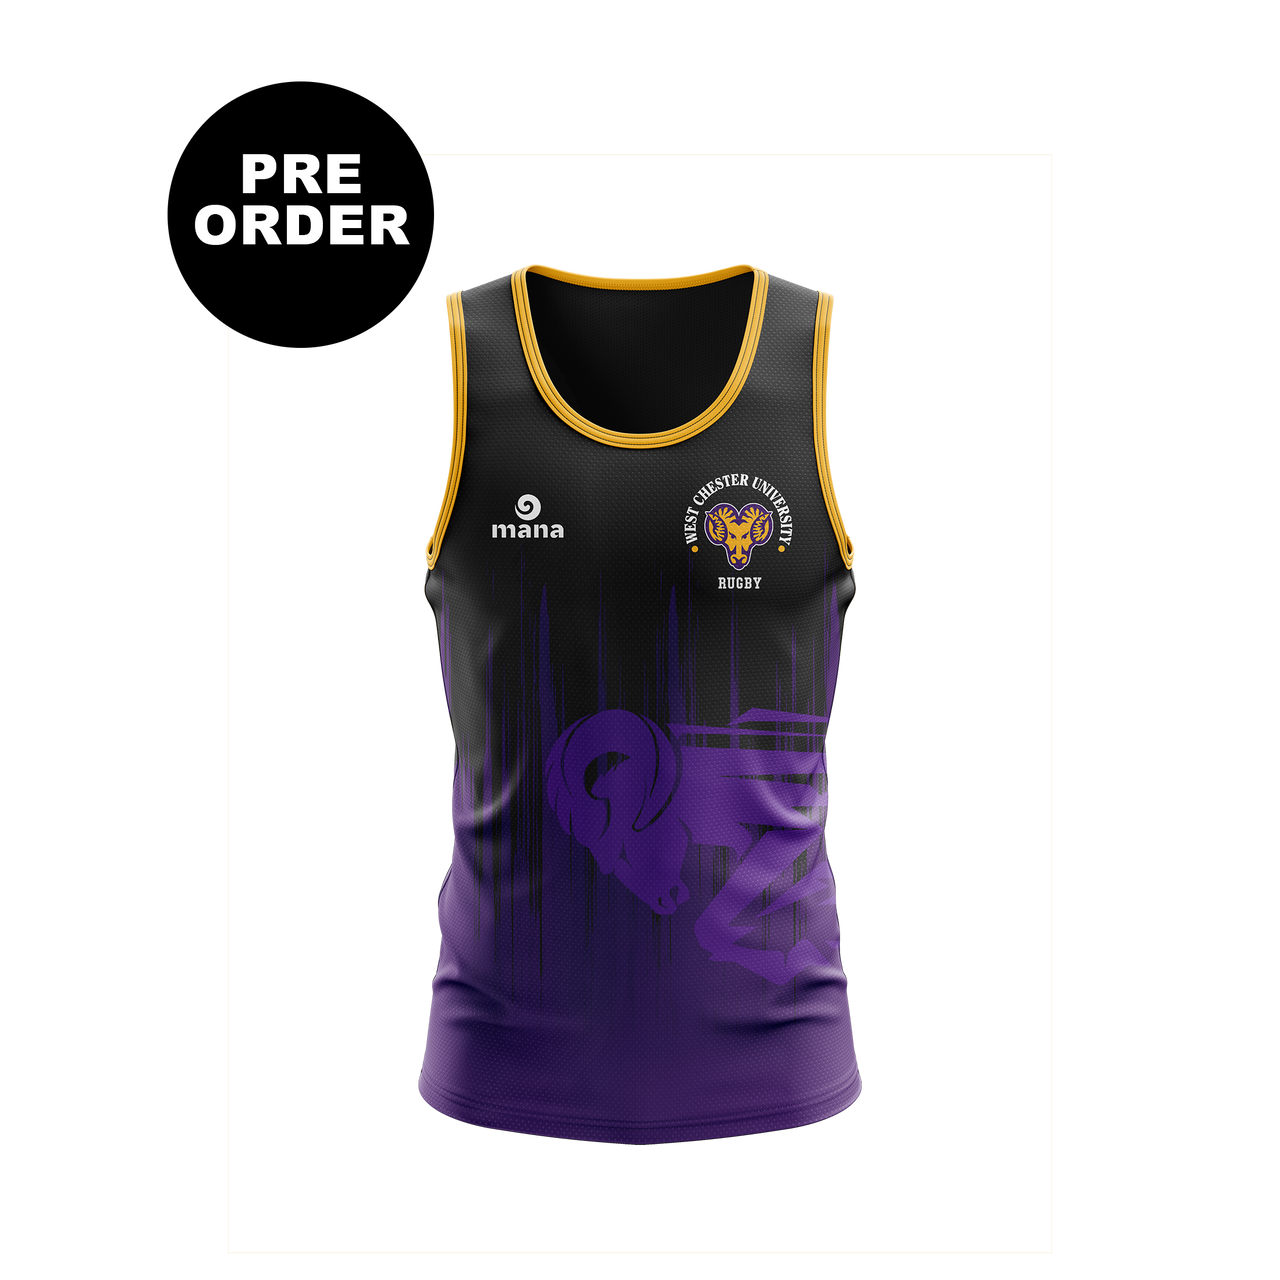 West Chester University Rugby Tank Top